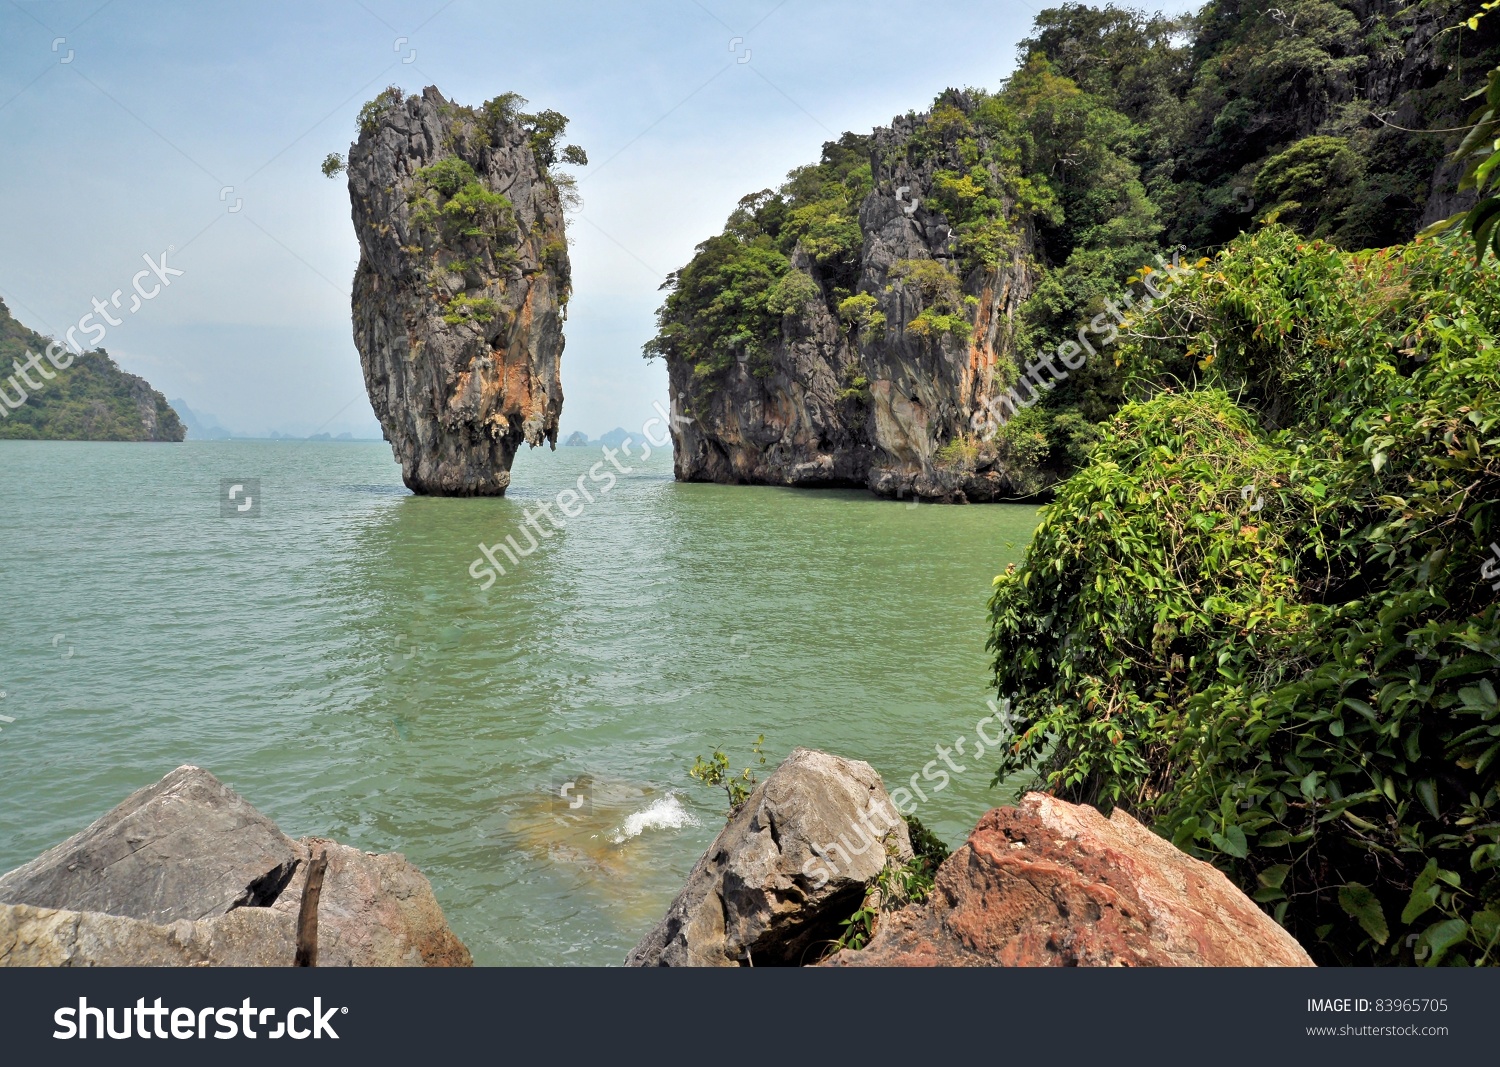 Khao Phing Kan clipart #3, Download drawings